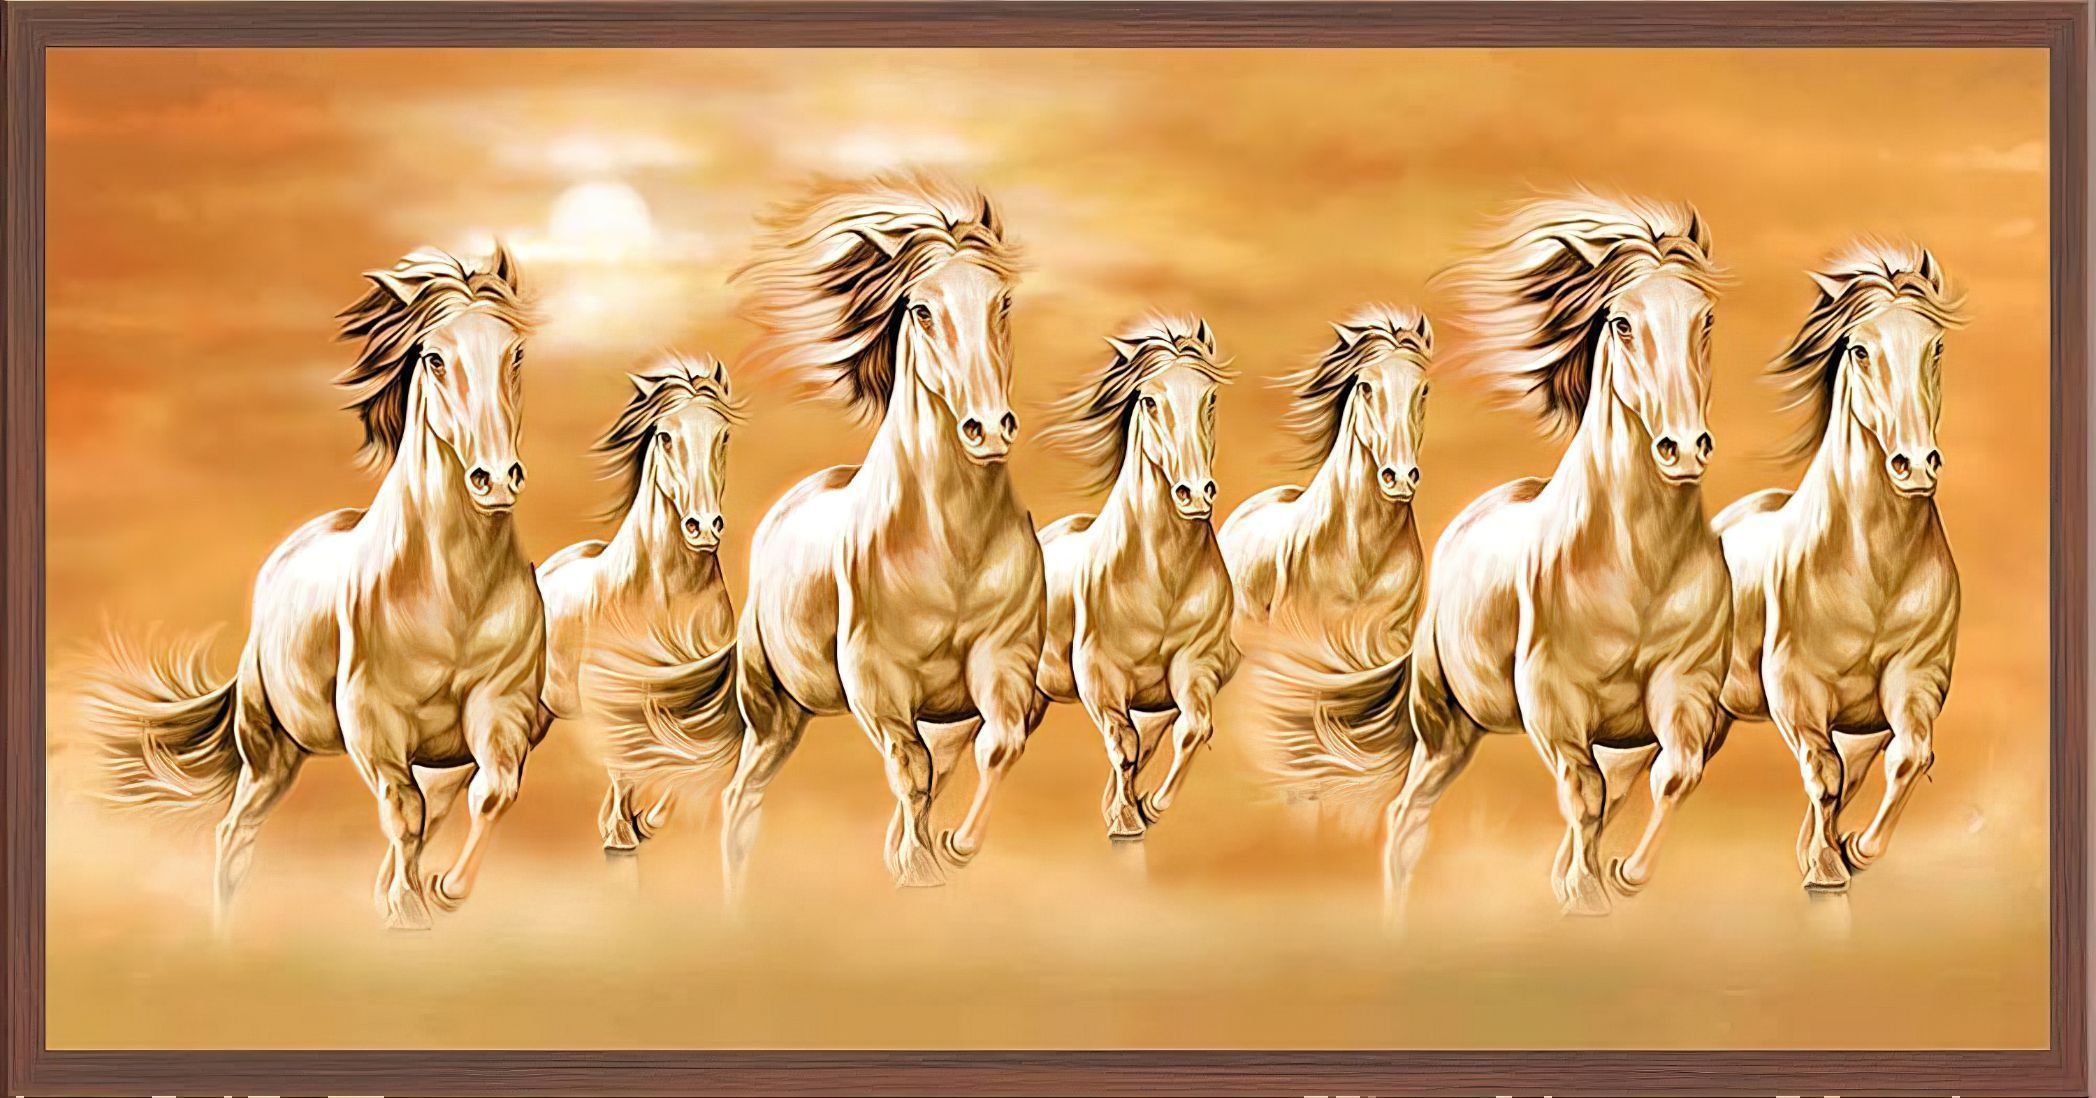 10 Feng Shui Horse Paintings for Your Home